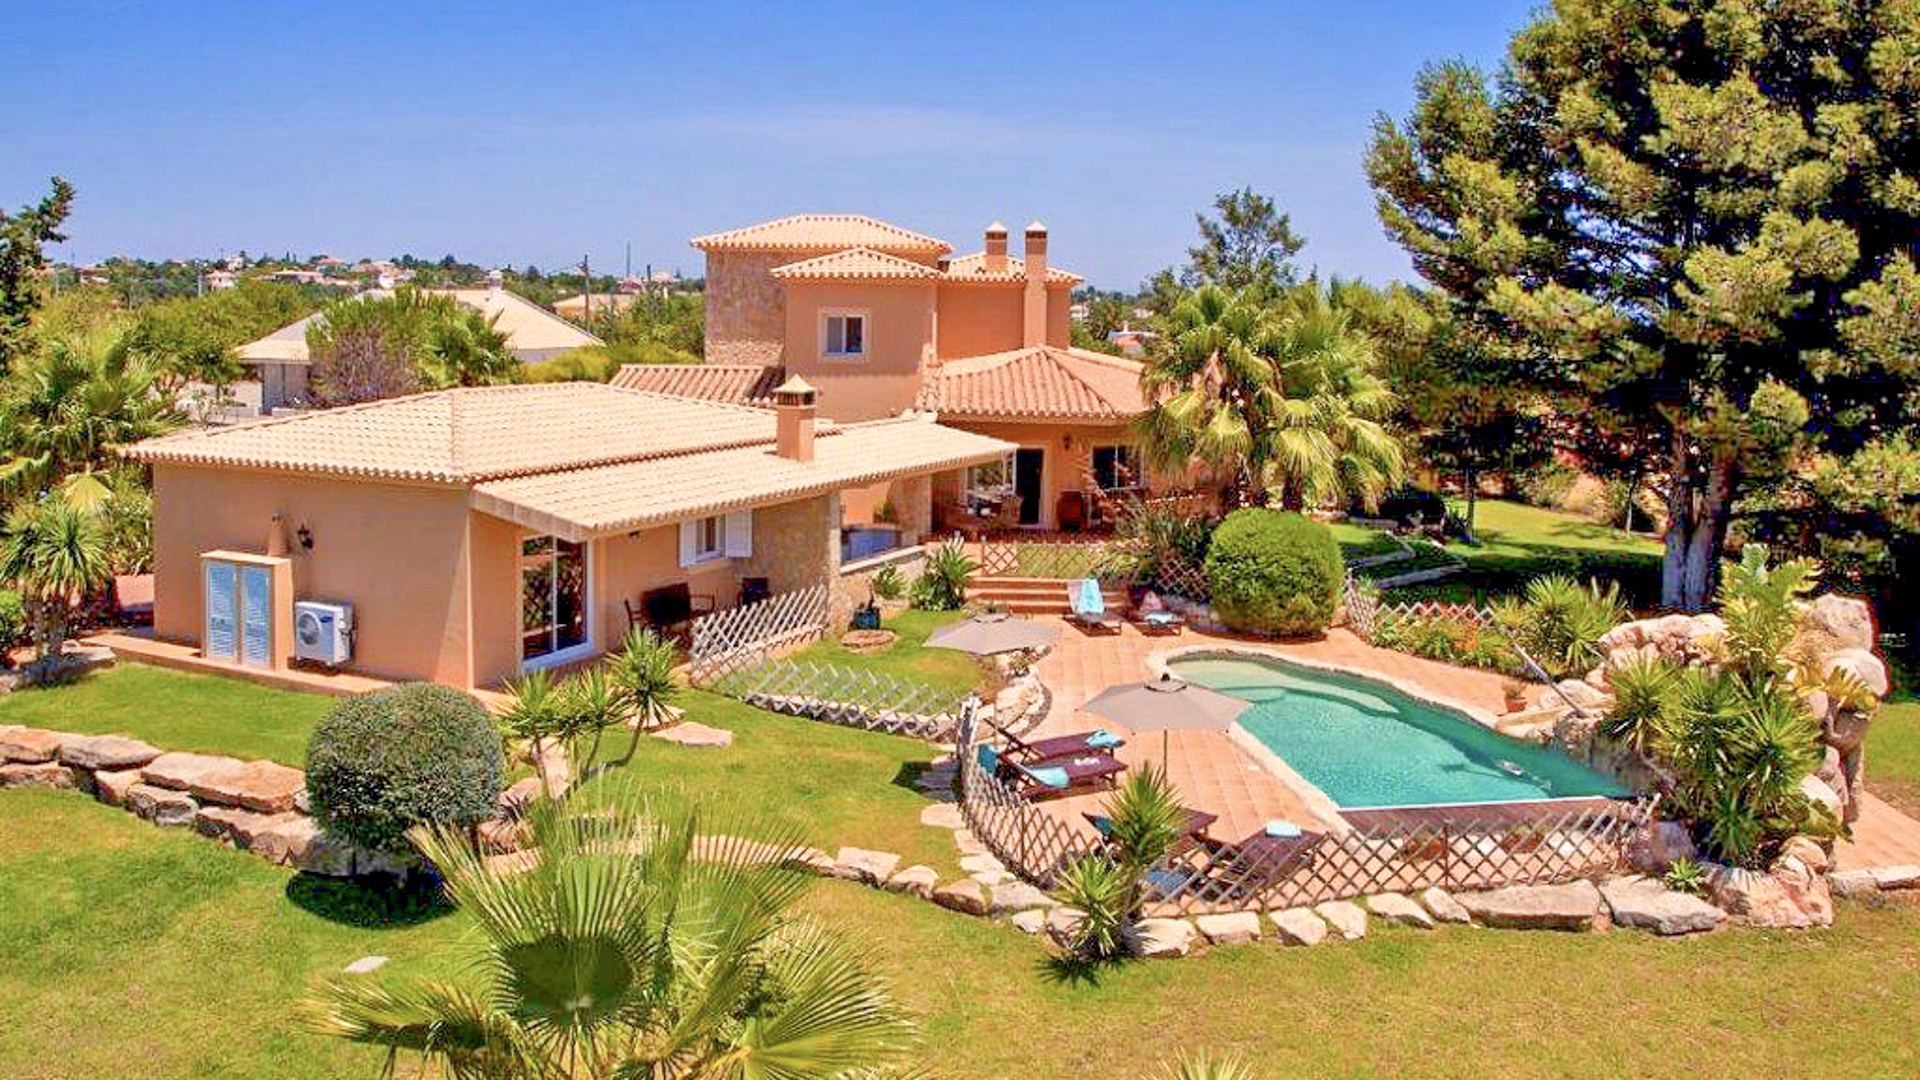 Beautiful 4 bedroom house with sea views in Carvoeiro | S1857 4 bedroom villa in Carvoeiro with heated pool and sea views.With a big living area, this villa is located in Benagil, close to the beach, golf and amenities.